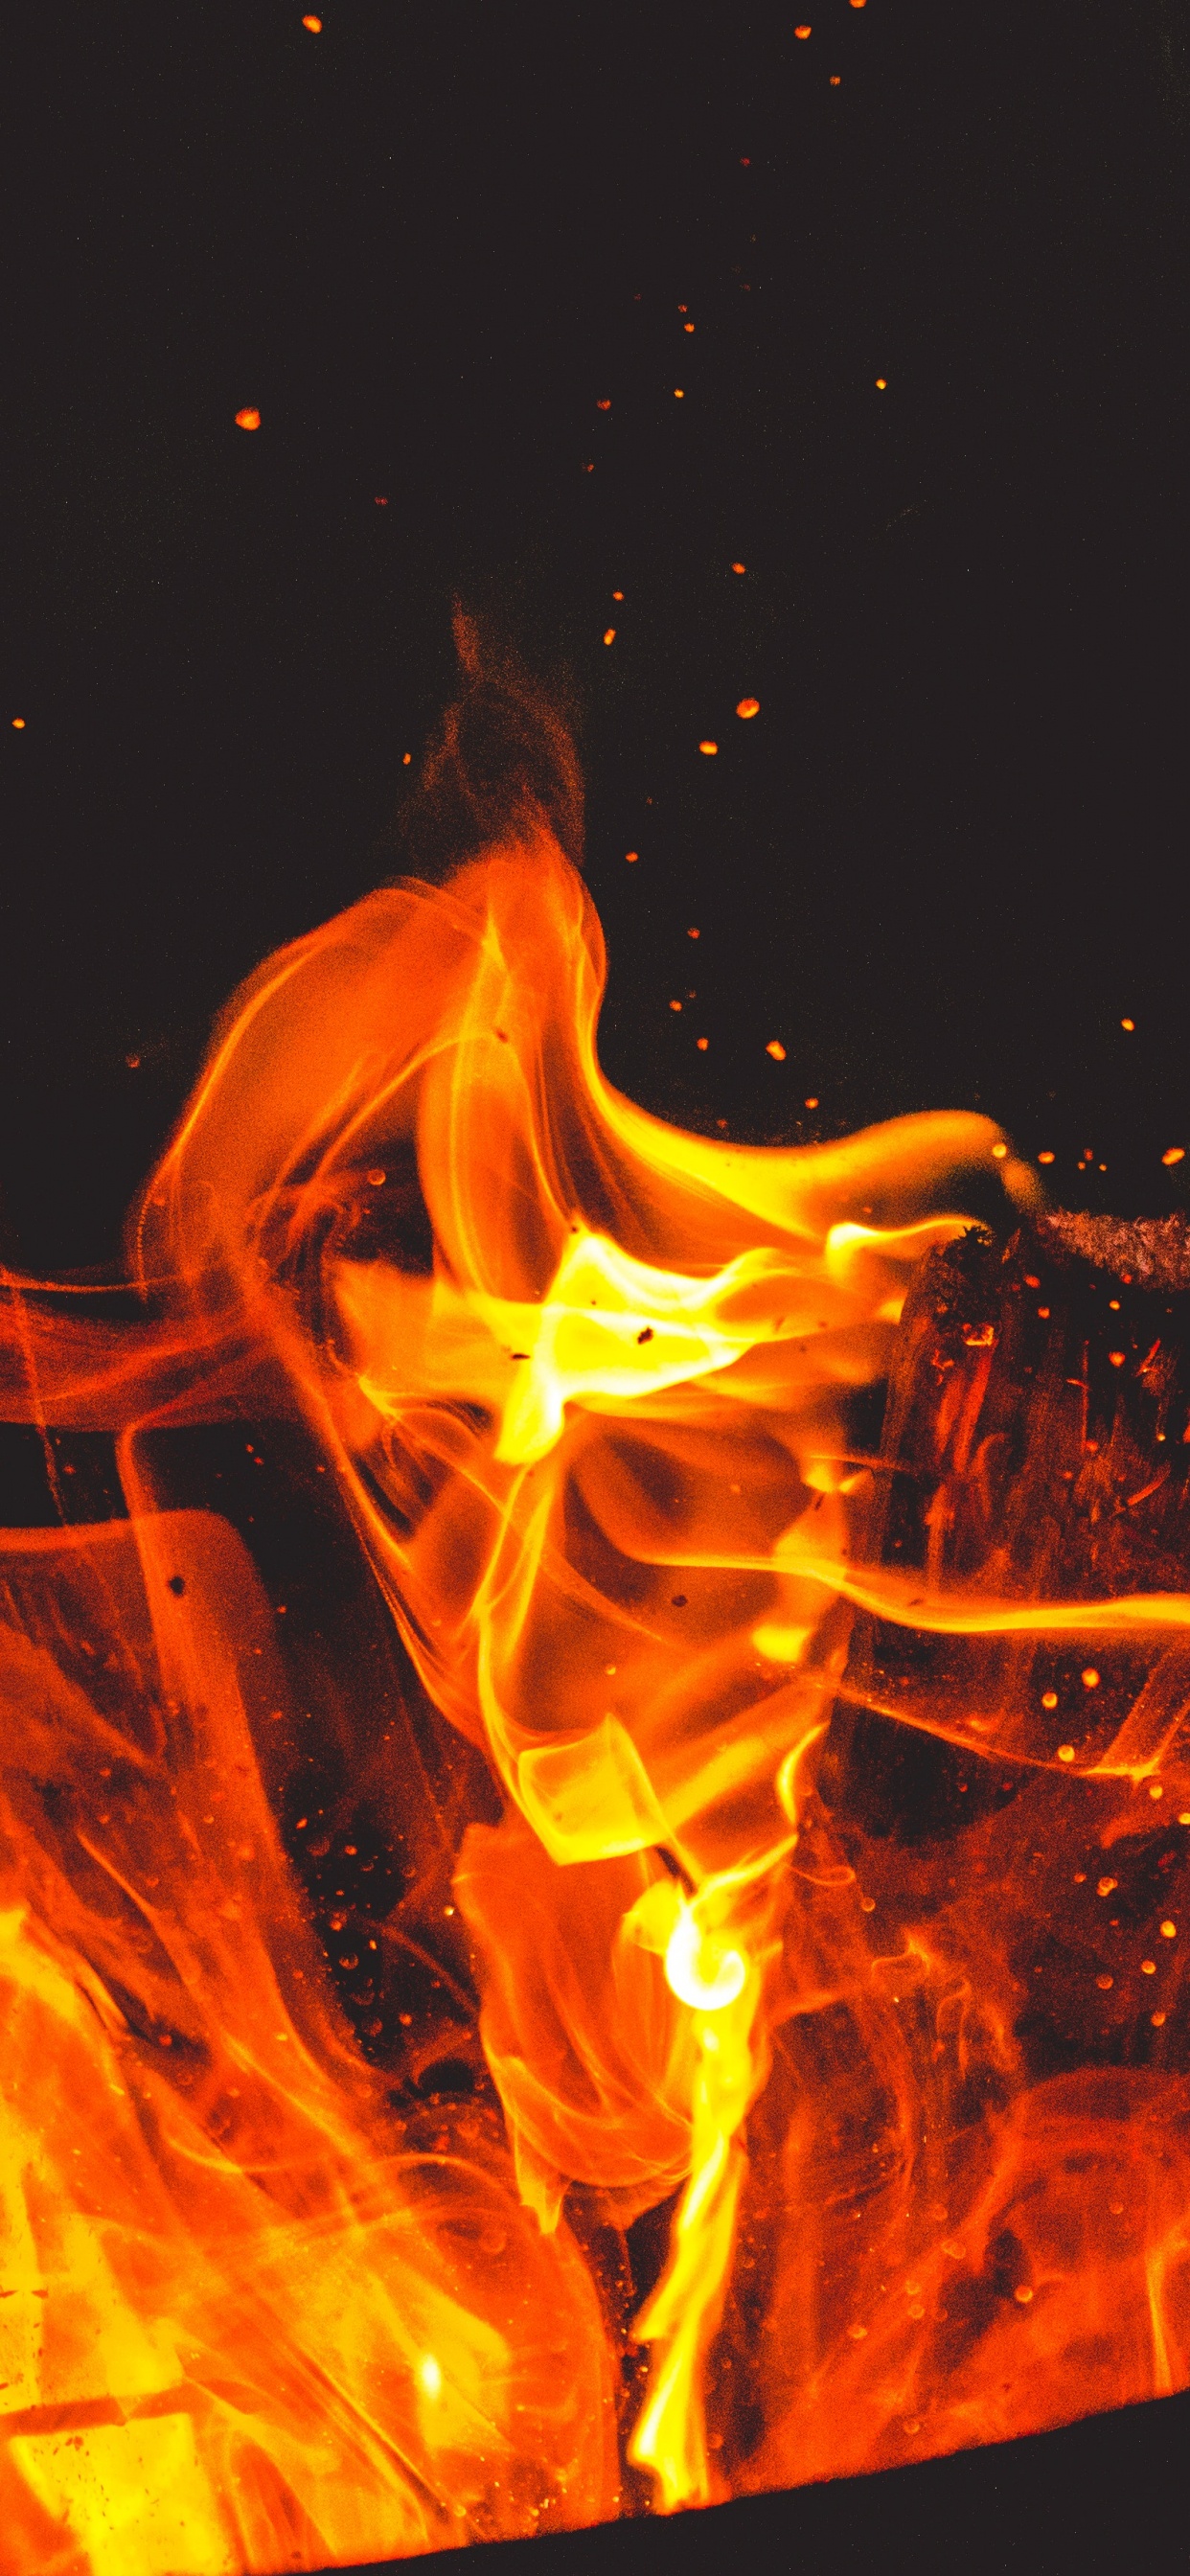 Orange and Yellow Flame Illustration. Wallpaper in 1242x2688 Resolution